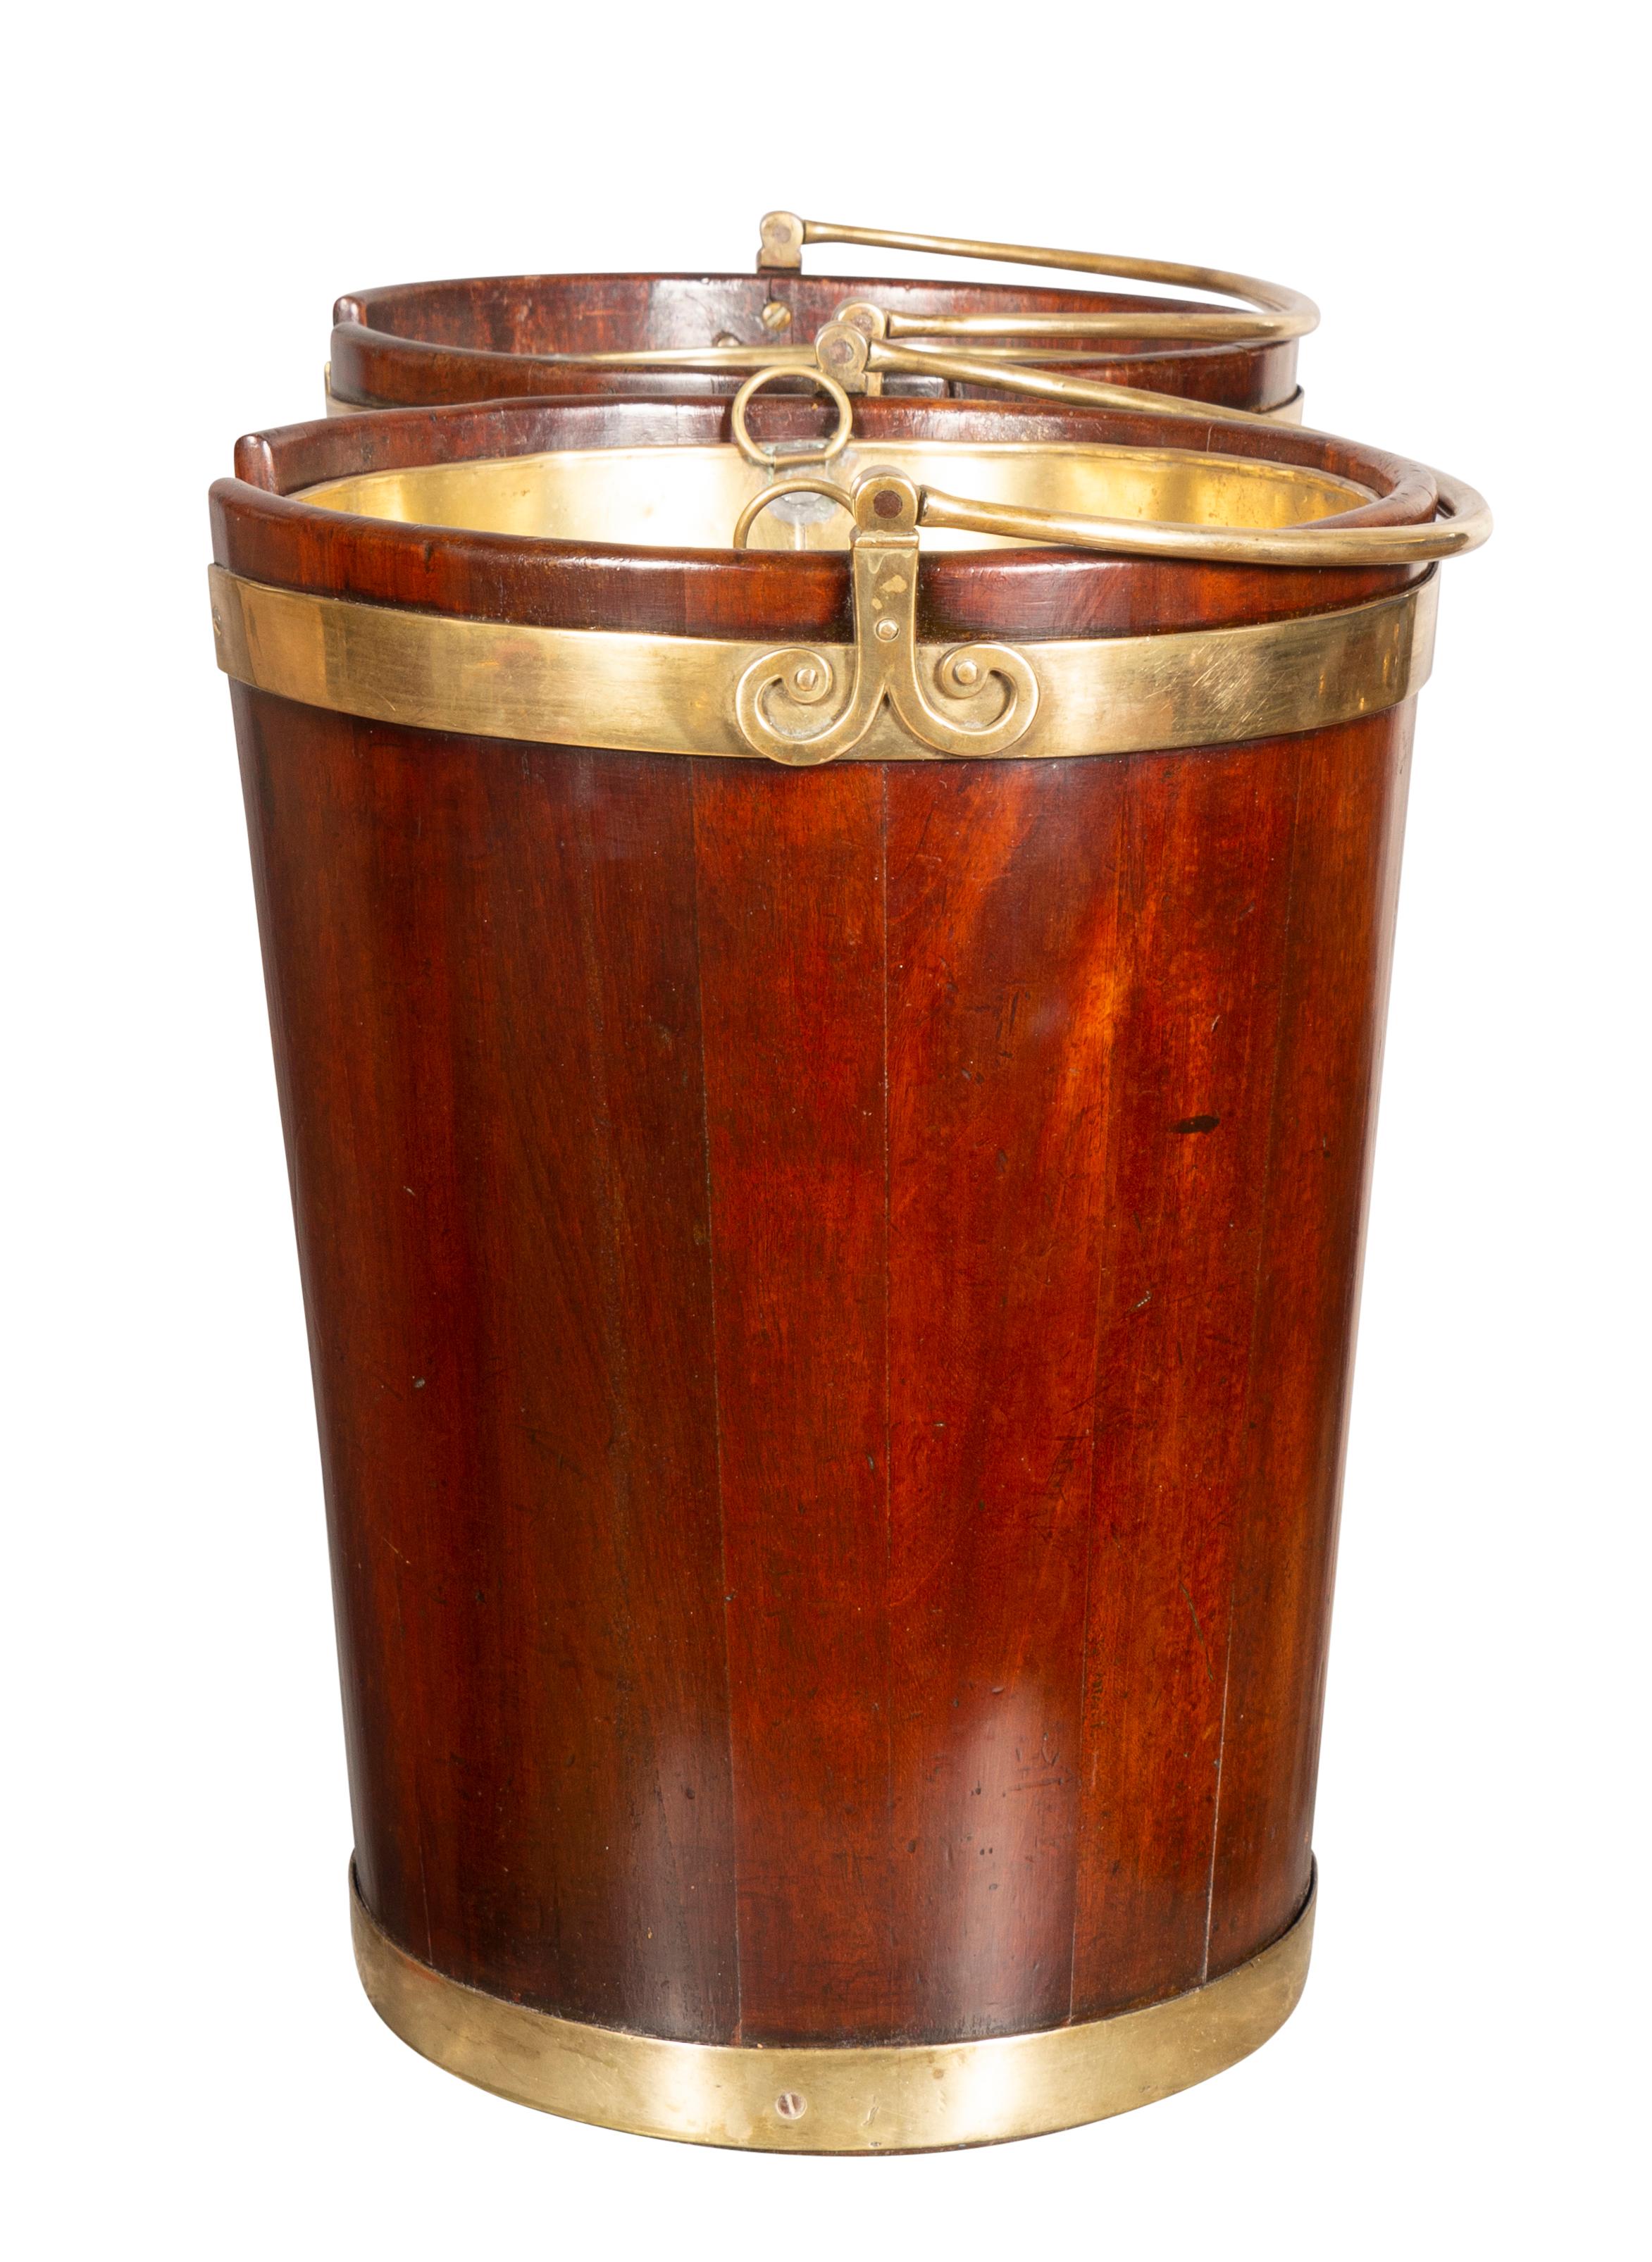 Pair of Regency Mahogany and Brass Banded Plate Buckets For Sale 1